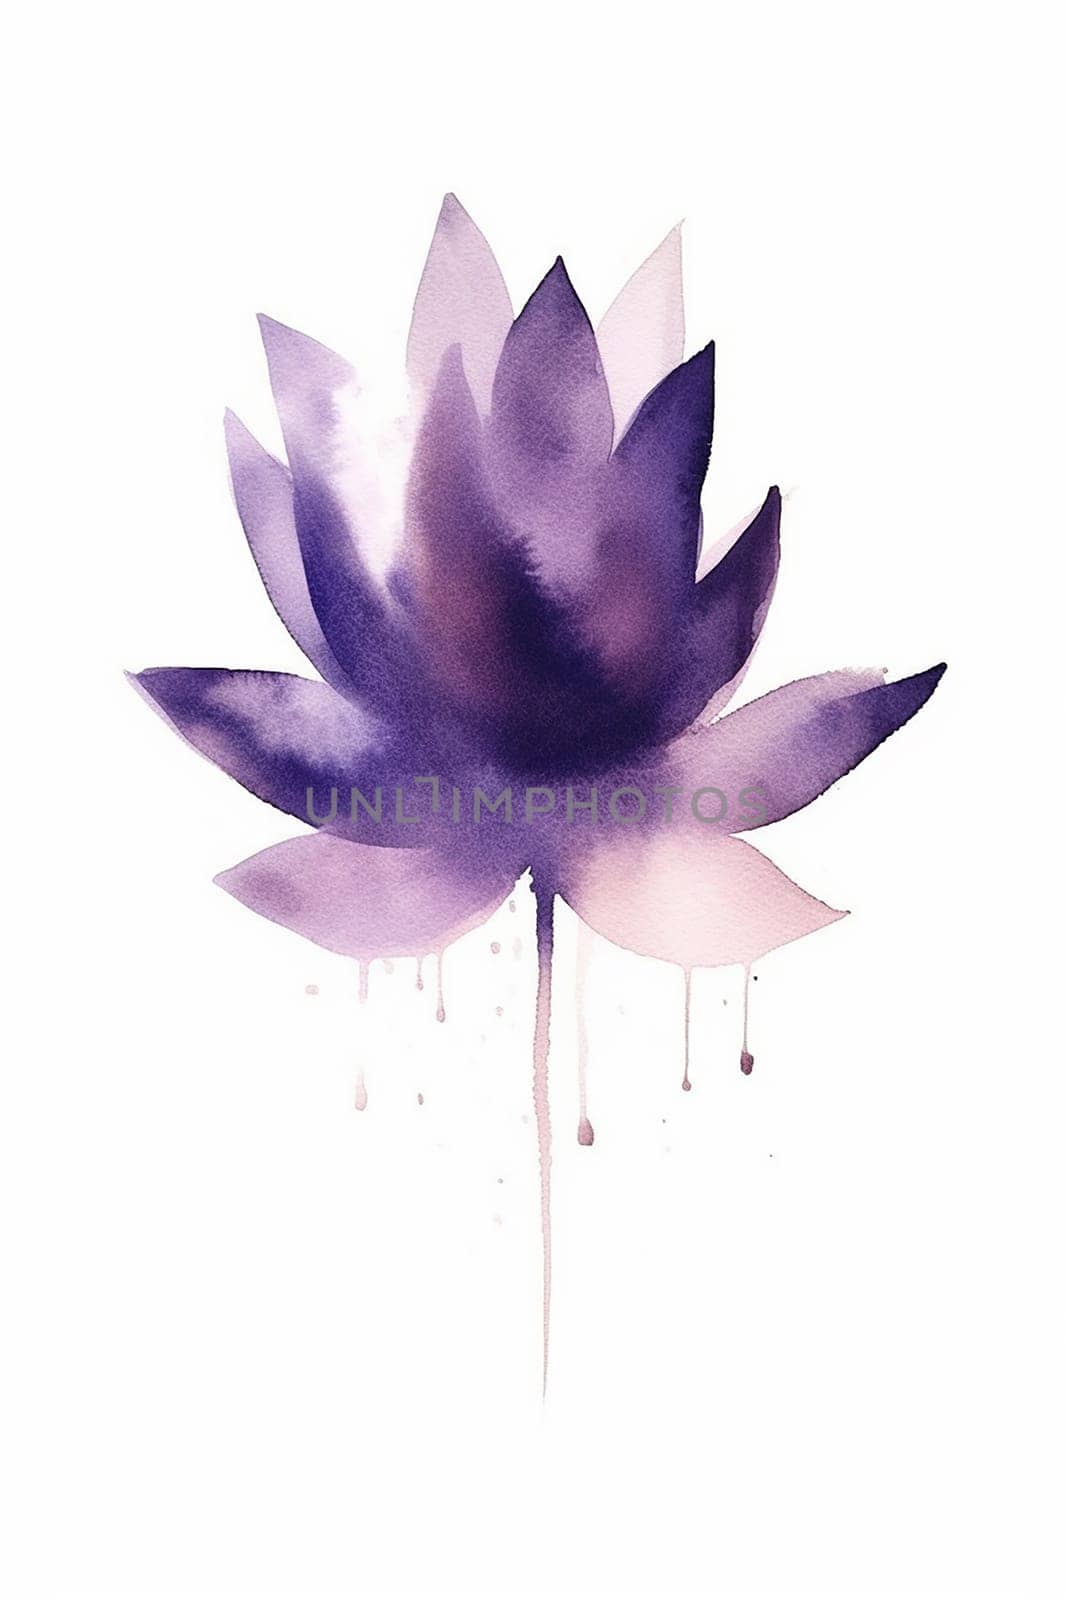 A purple watercolor painting of a stylized lotus flower with dripping paint detail. by Hype2art